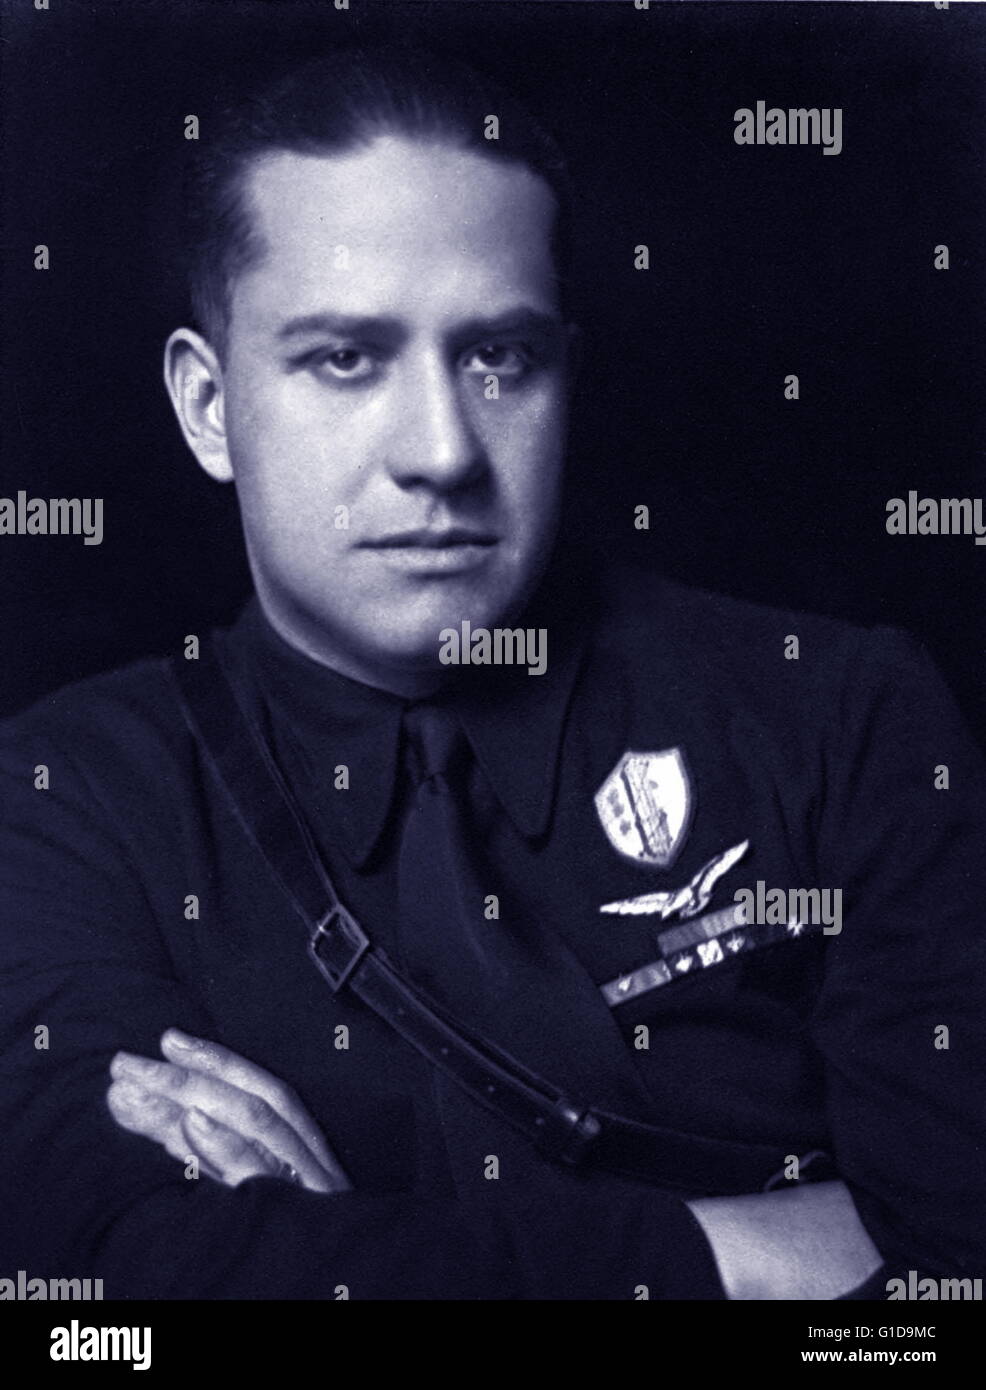 Count Gian Galeazzo Ciano, (1903 – 11 January 1944), Foreign Minister of Fascist Italy from 1936 until 1943 and Benito Mussolini's son-in-law. On 11 January 1944, Count Ciano was shot by firing squad at the behest of his father-in-law, Mussolini Stock Photo